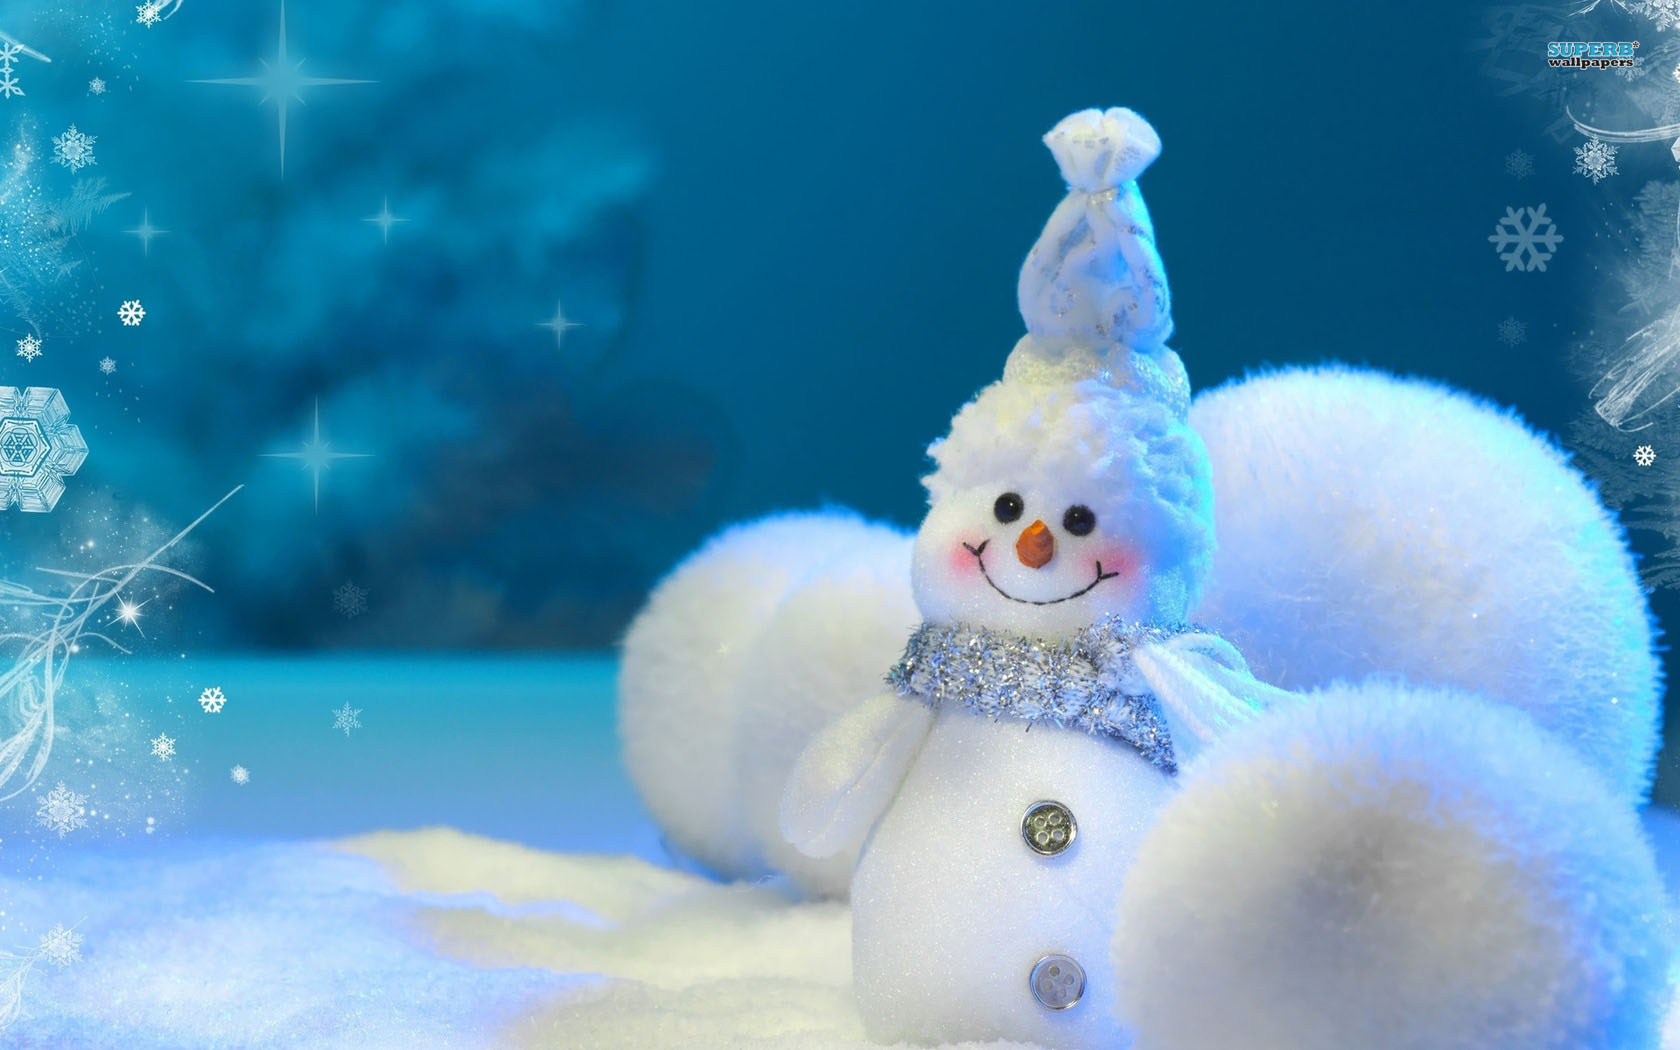 Cute Snowman Wallpaper Pictures In High Definition Or